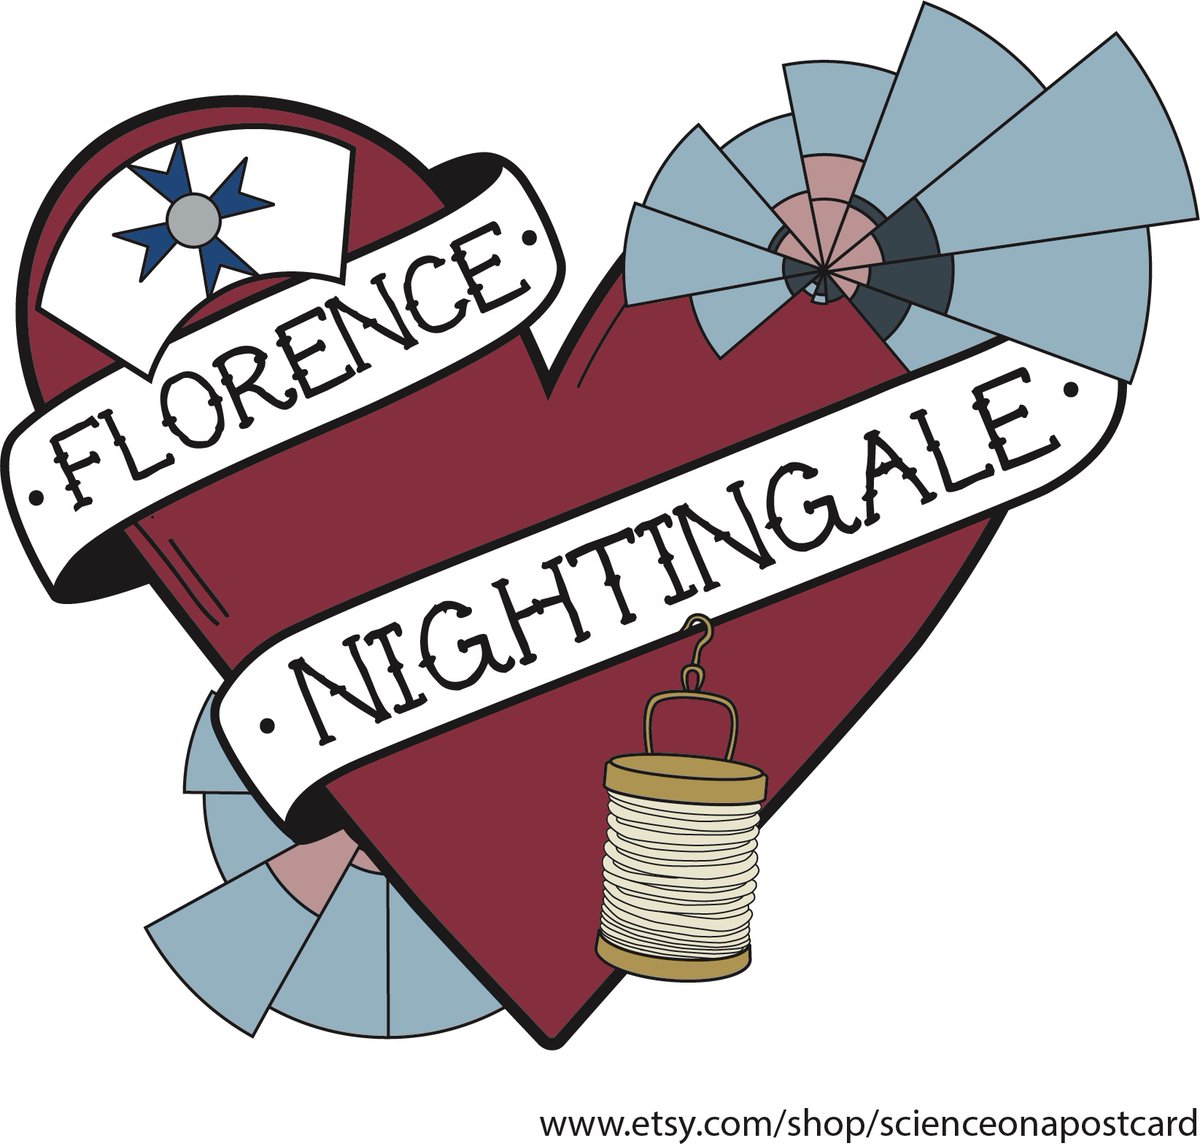 #YRS2020 has just started & our virtual assistant #Flo will be reading your tweets 👀 and awarding a prize to the best tweet of the day: one of these beautiful #Nightingale2020 badges designed by the very talented local scientist @heidirgardner @ScienceOnA 😍